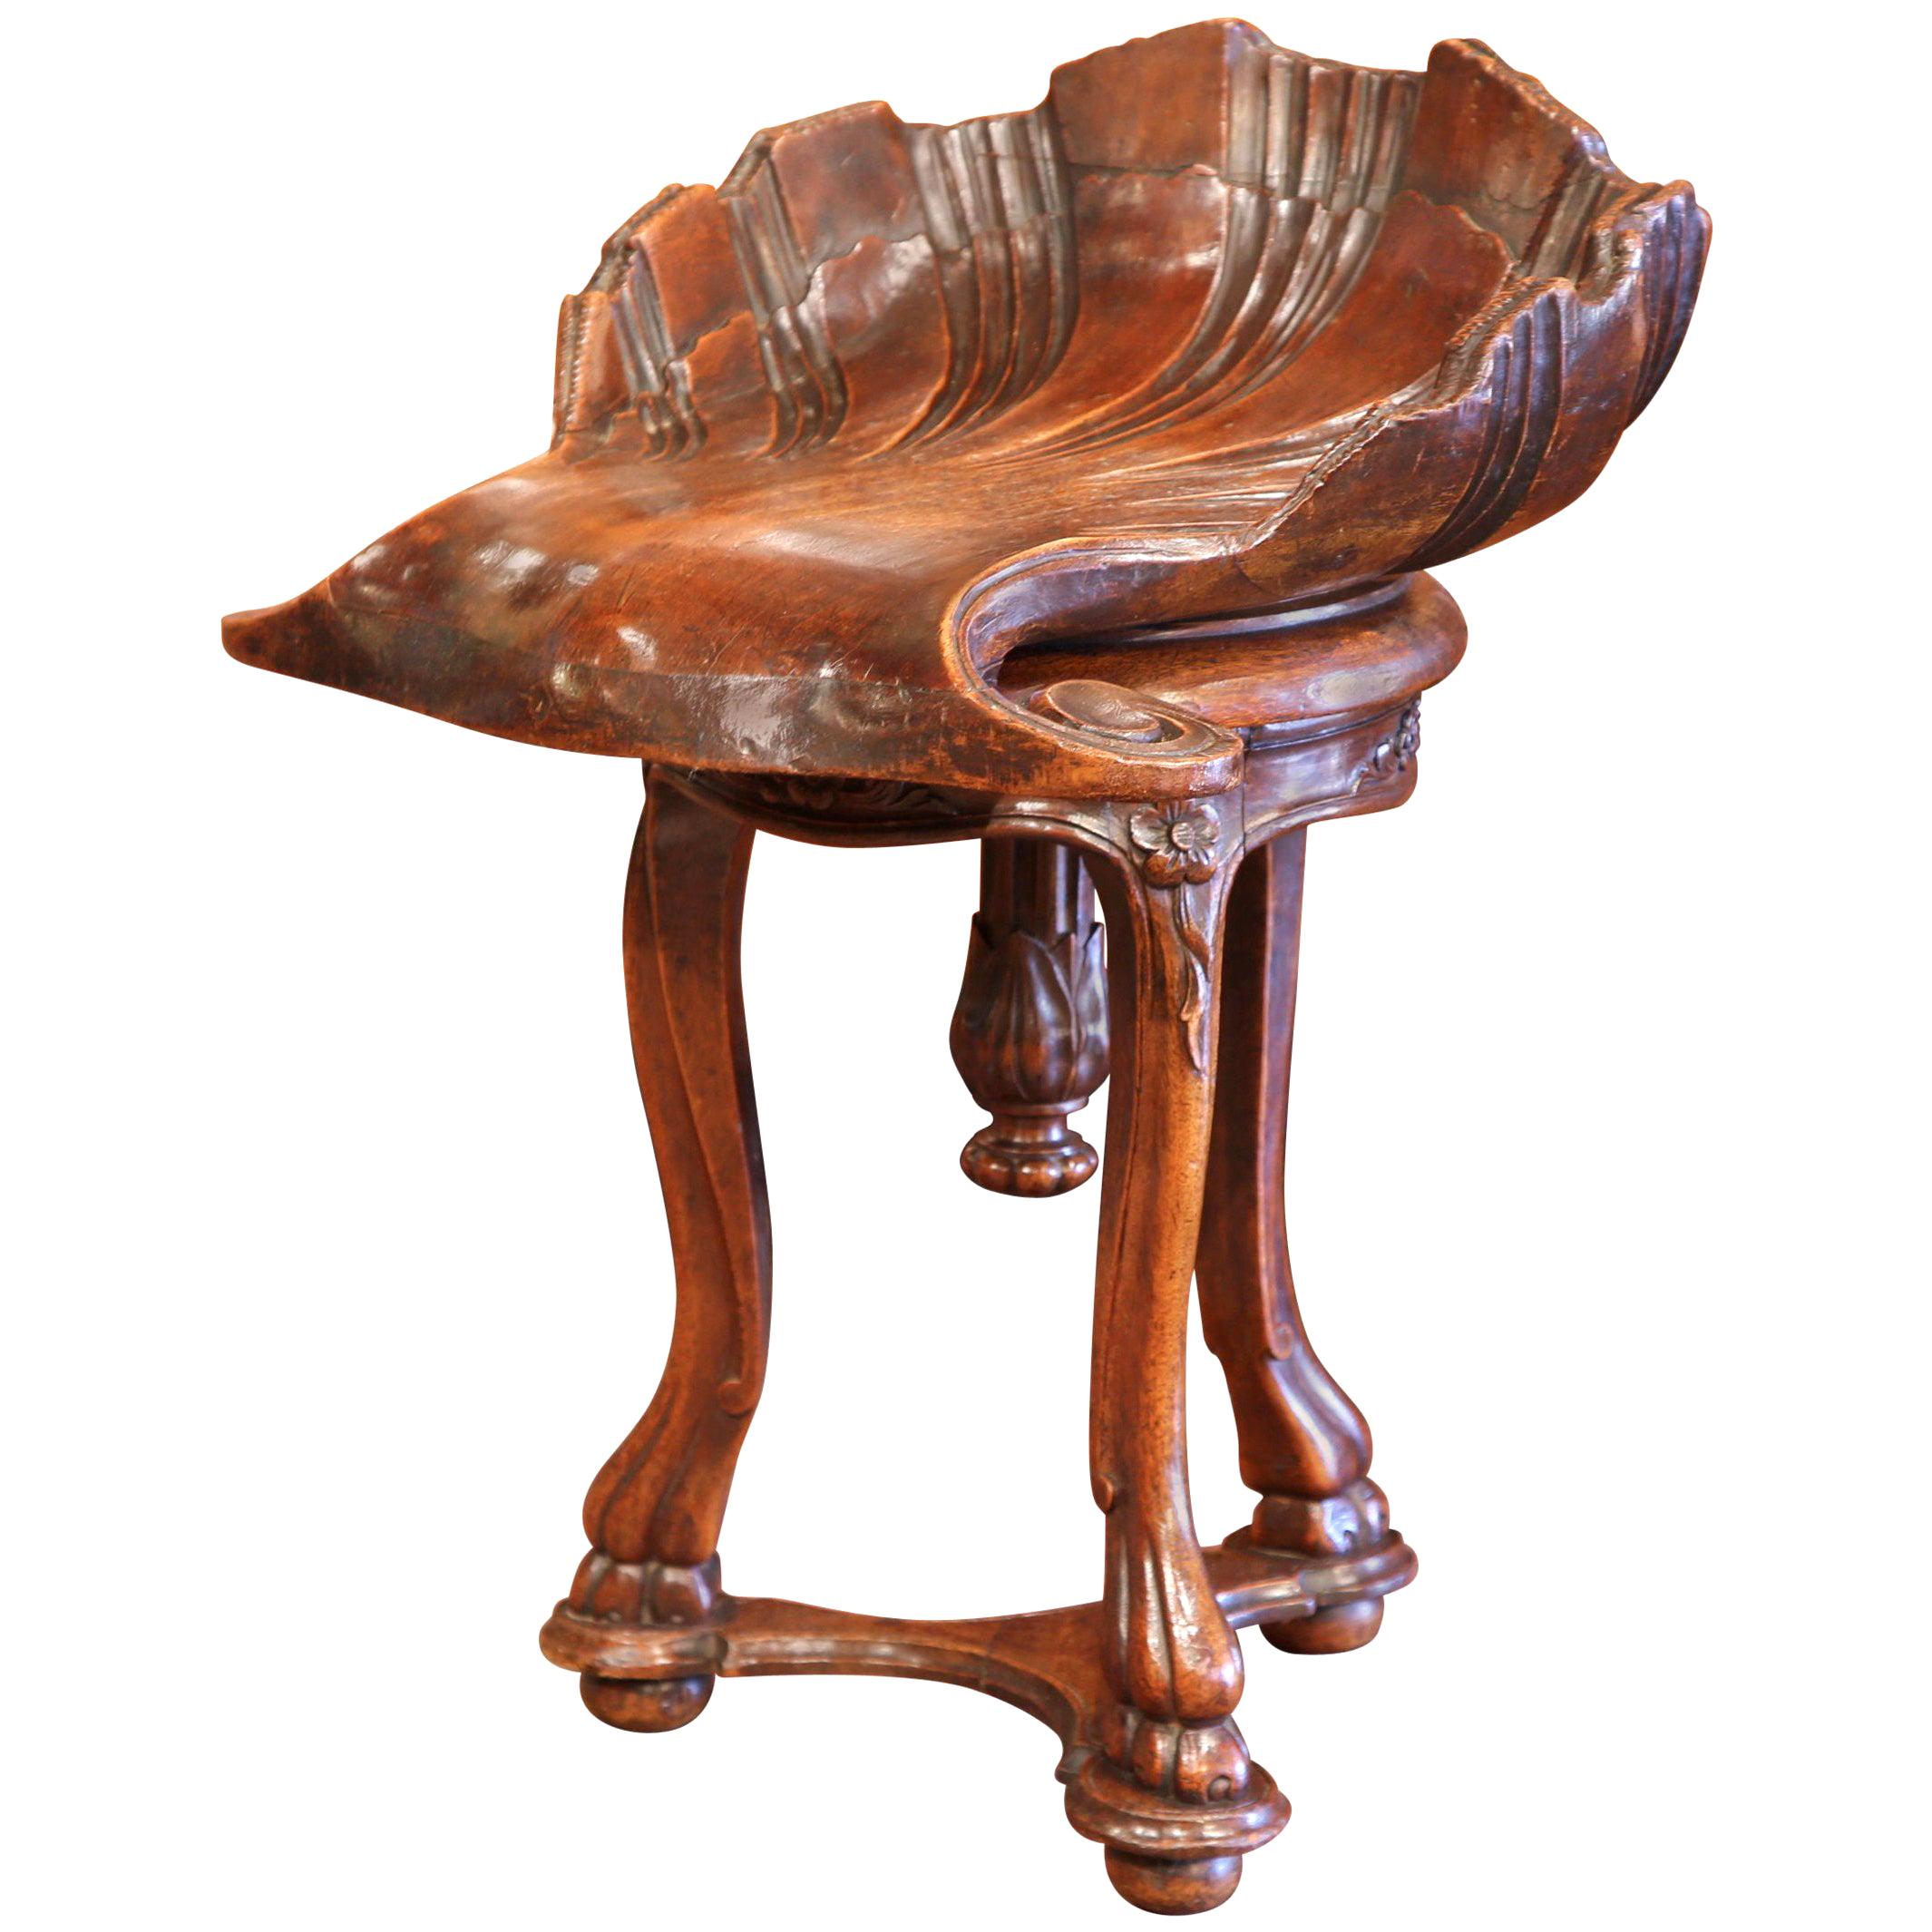 19th Century, French Hand Carved Walnut Piano Grotto Stool with Shell Motif